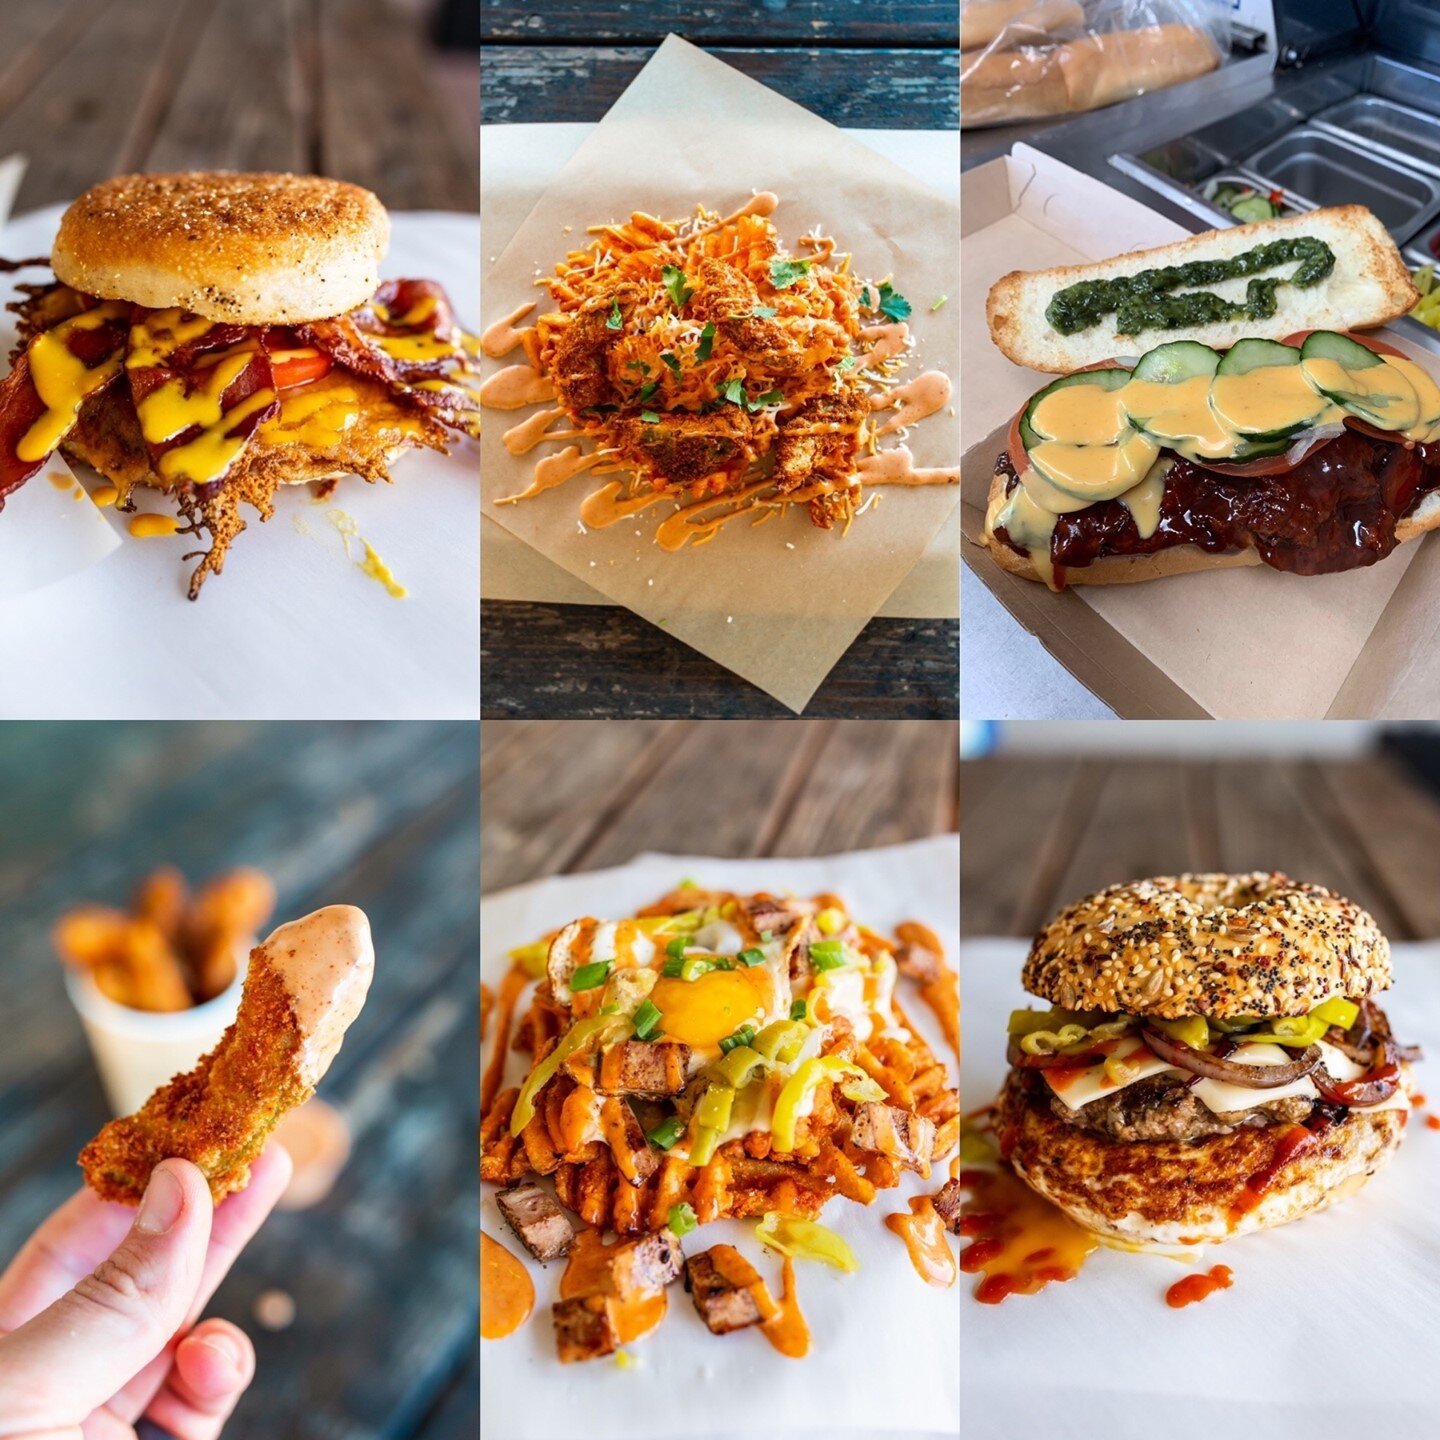 You can only pick one, GO!!⁠
⁠
TL - Breakfast English Muffin⁠
TM - San Diego DiRtY Fries⁠
TR - Al's Chicken Sando⁠
BL - Avocado Fries⁠
BM - DiRtY Jersey Fries⁠
BR - Breakfast Bagel Burger⁠
⁠
🦄 See the #bestfoodtruckever menu, locations, or ask about